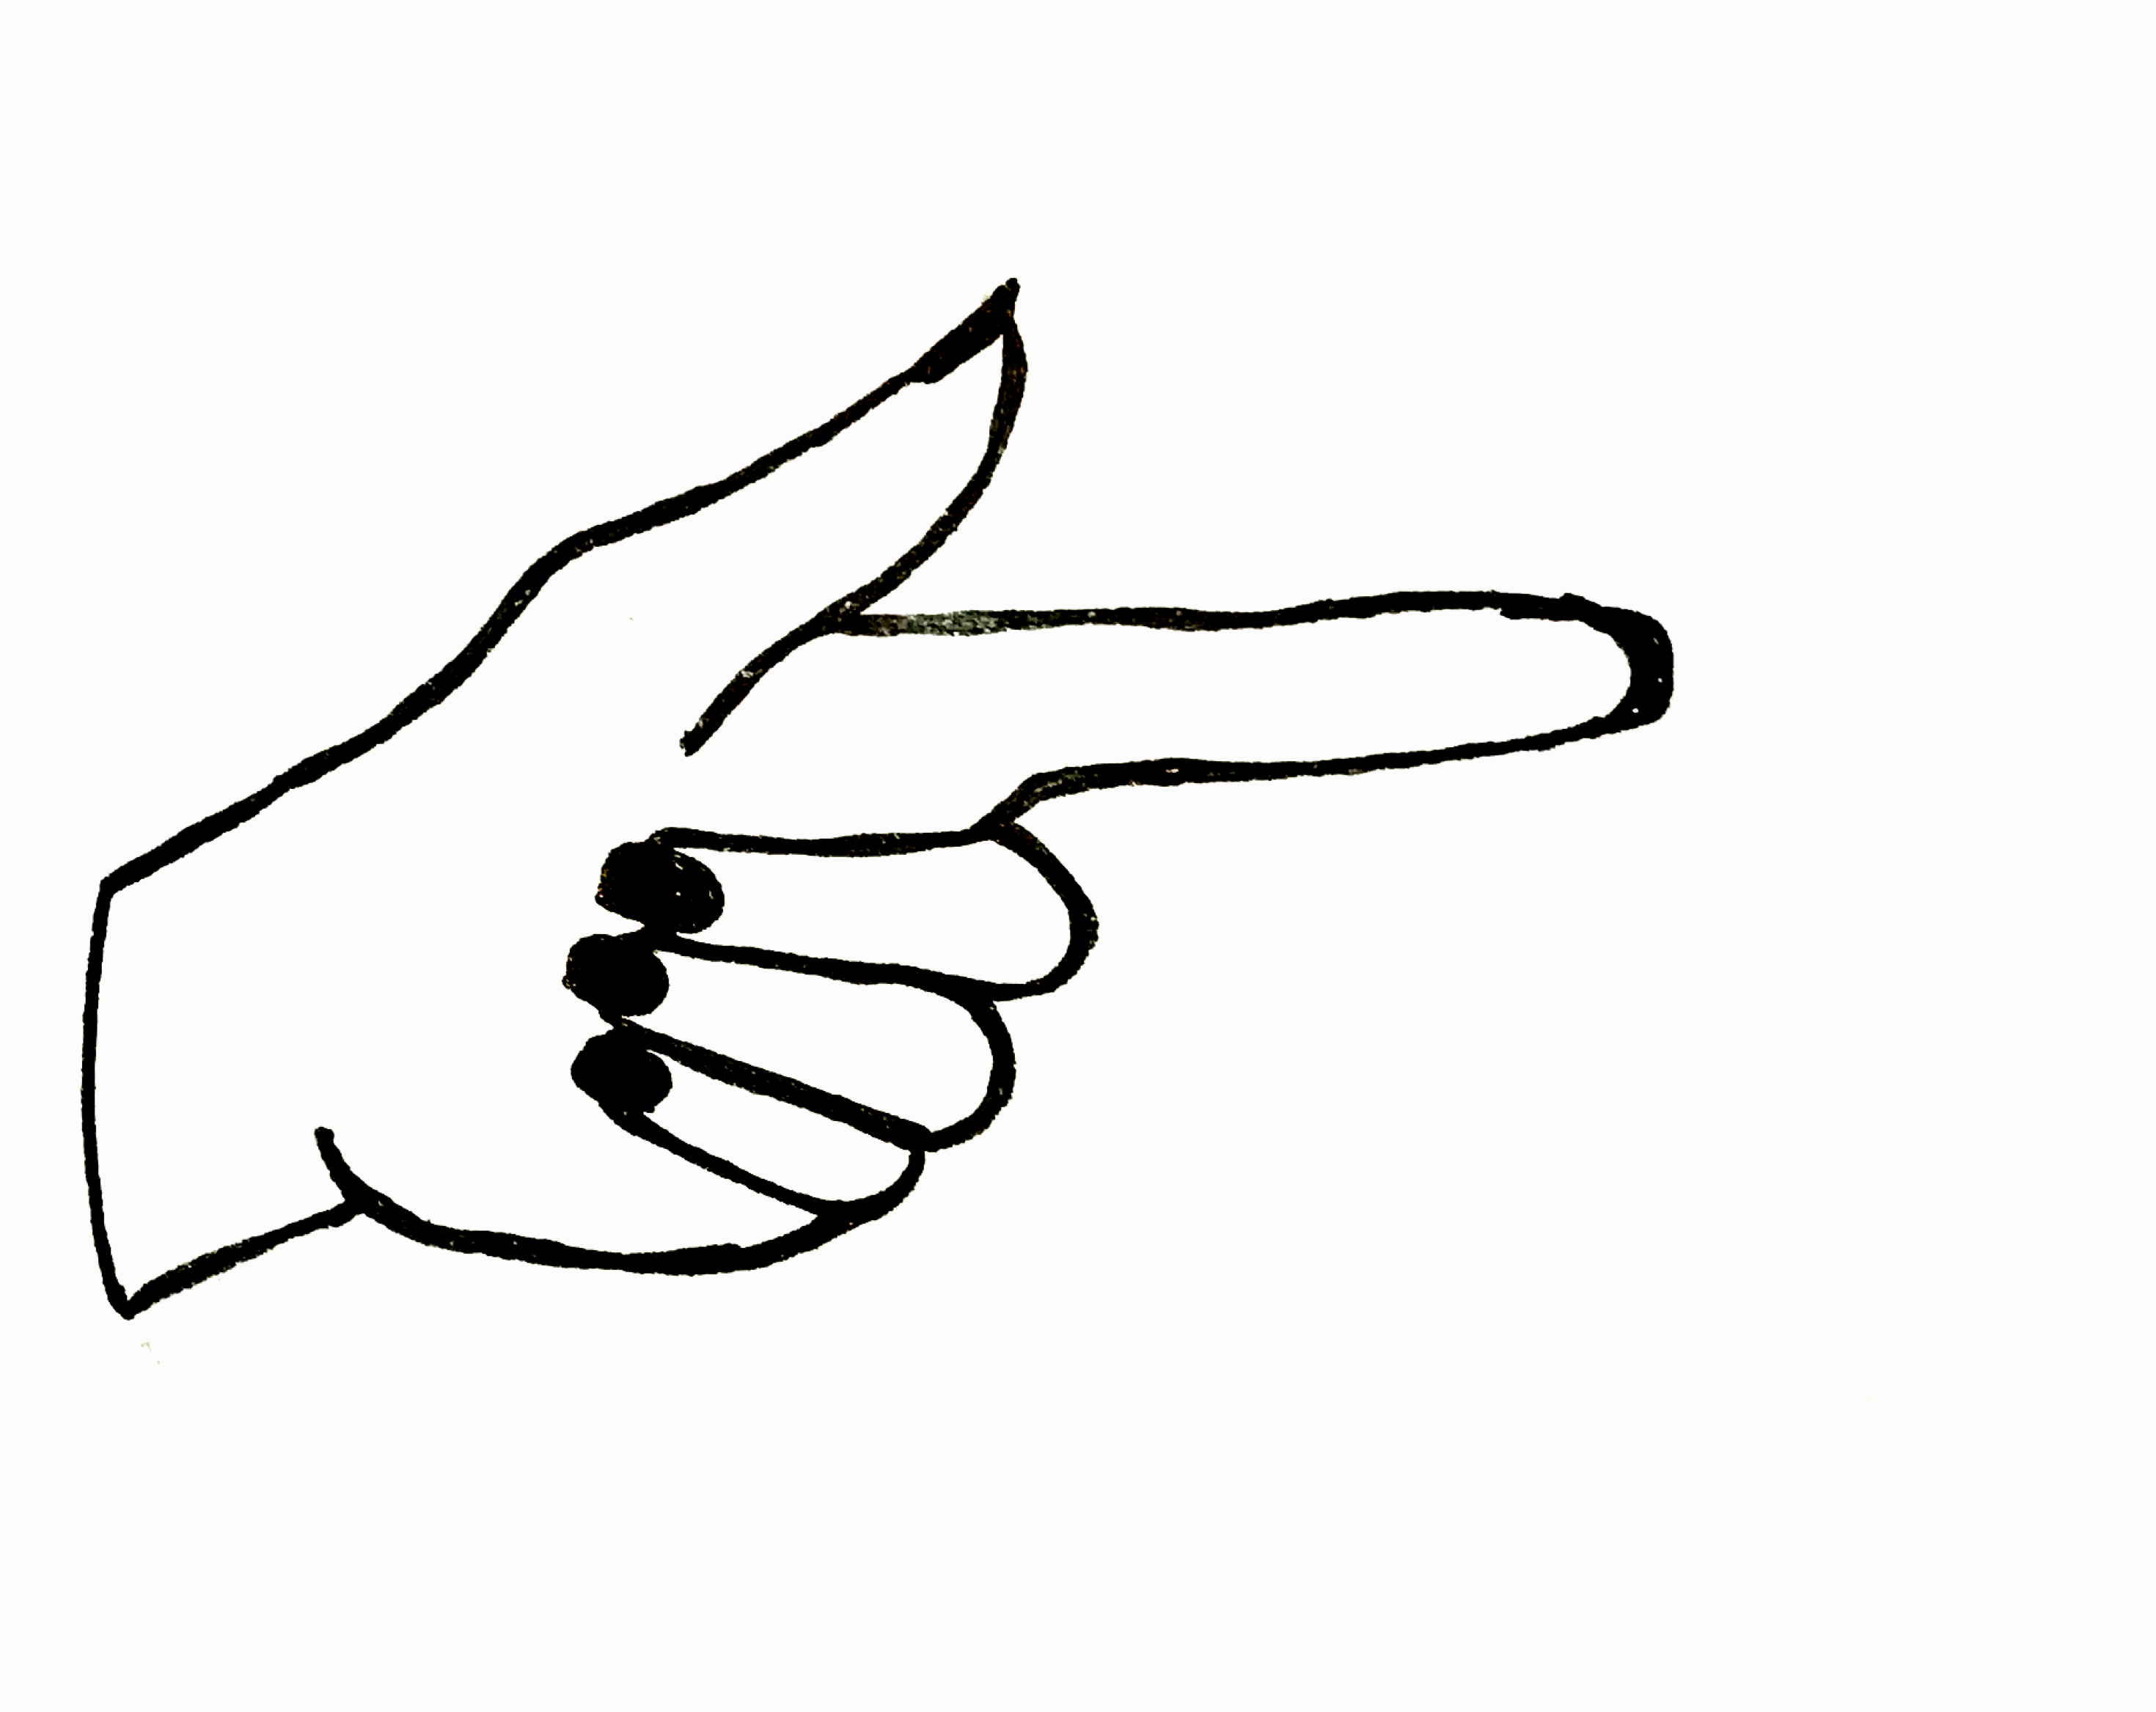 An illustration of a woman's hand pointing right.